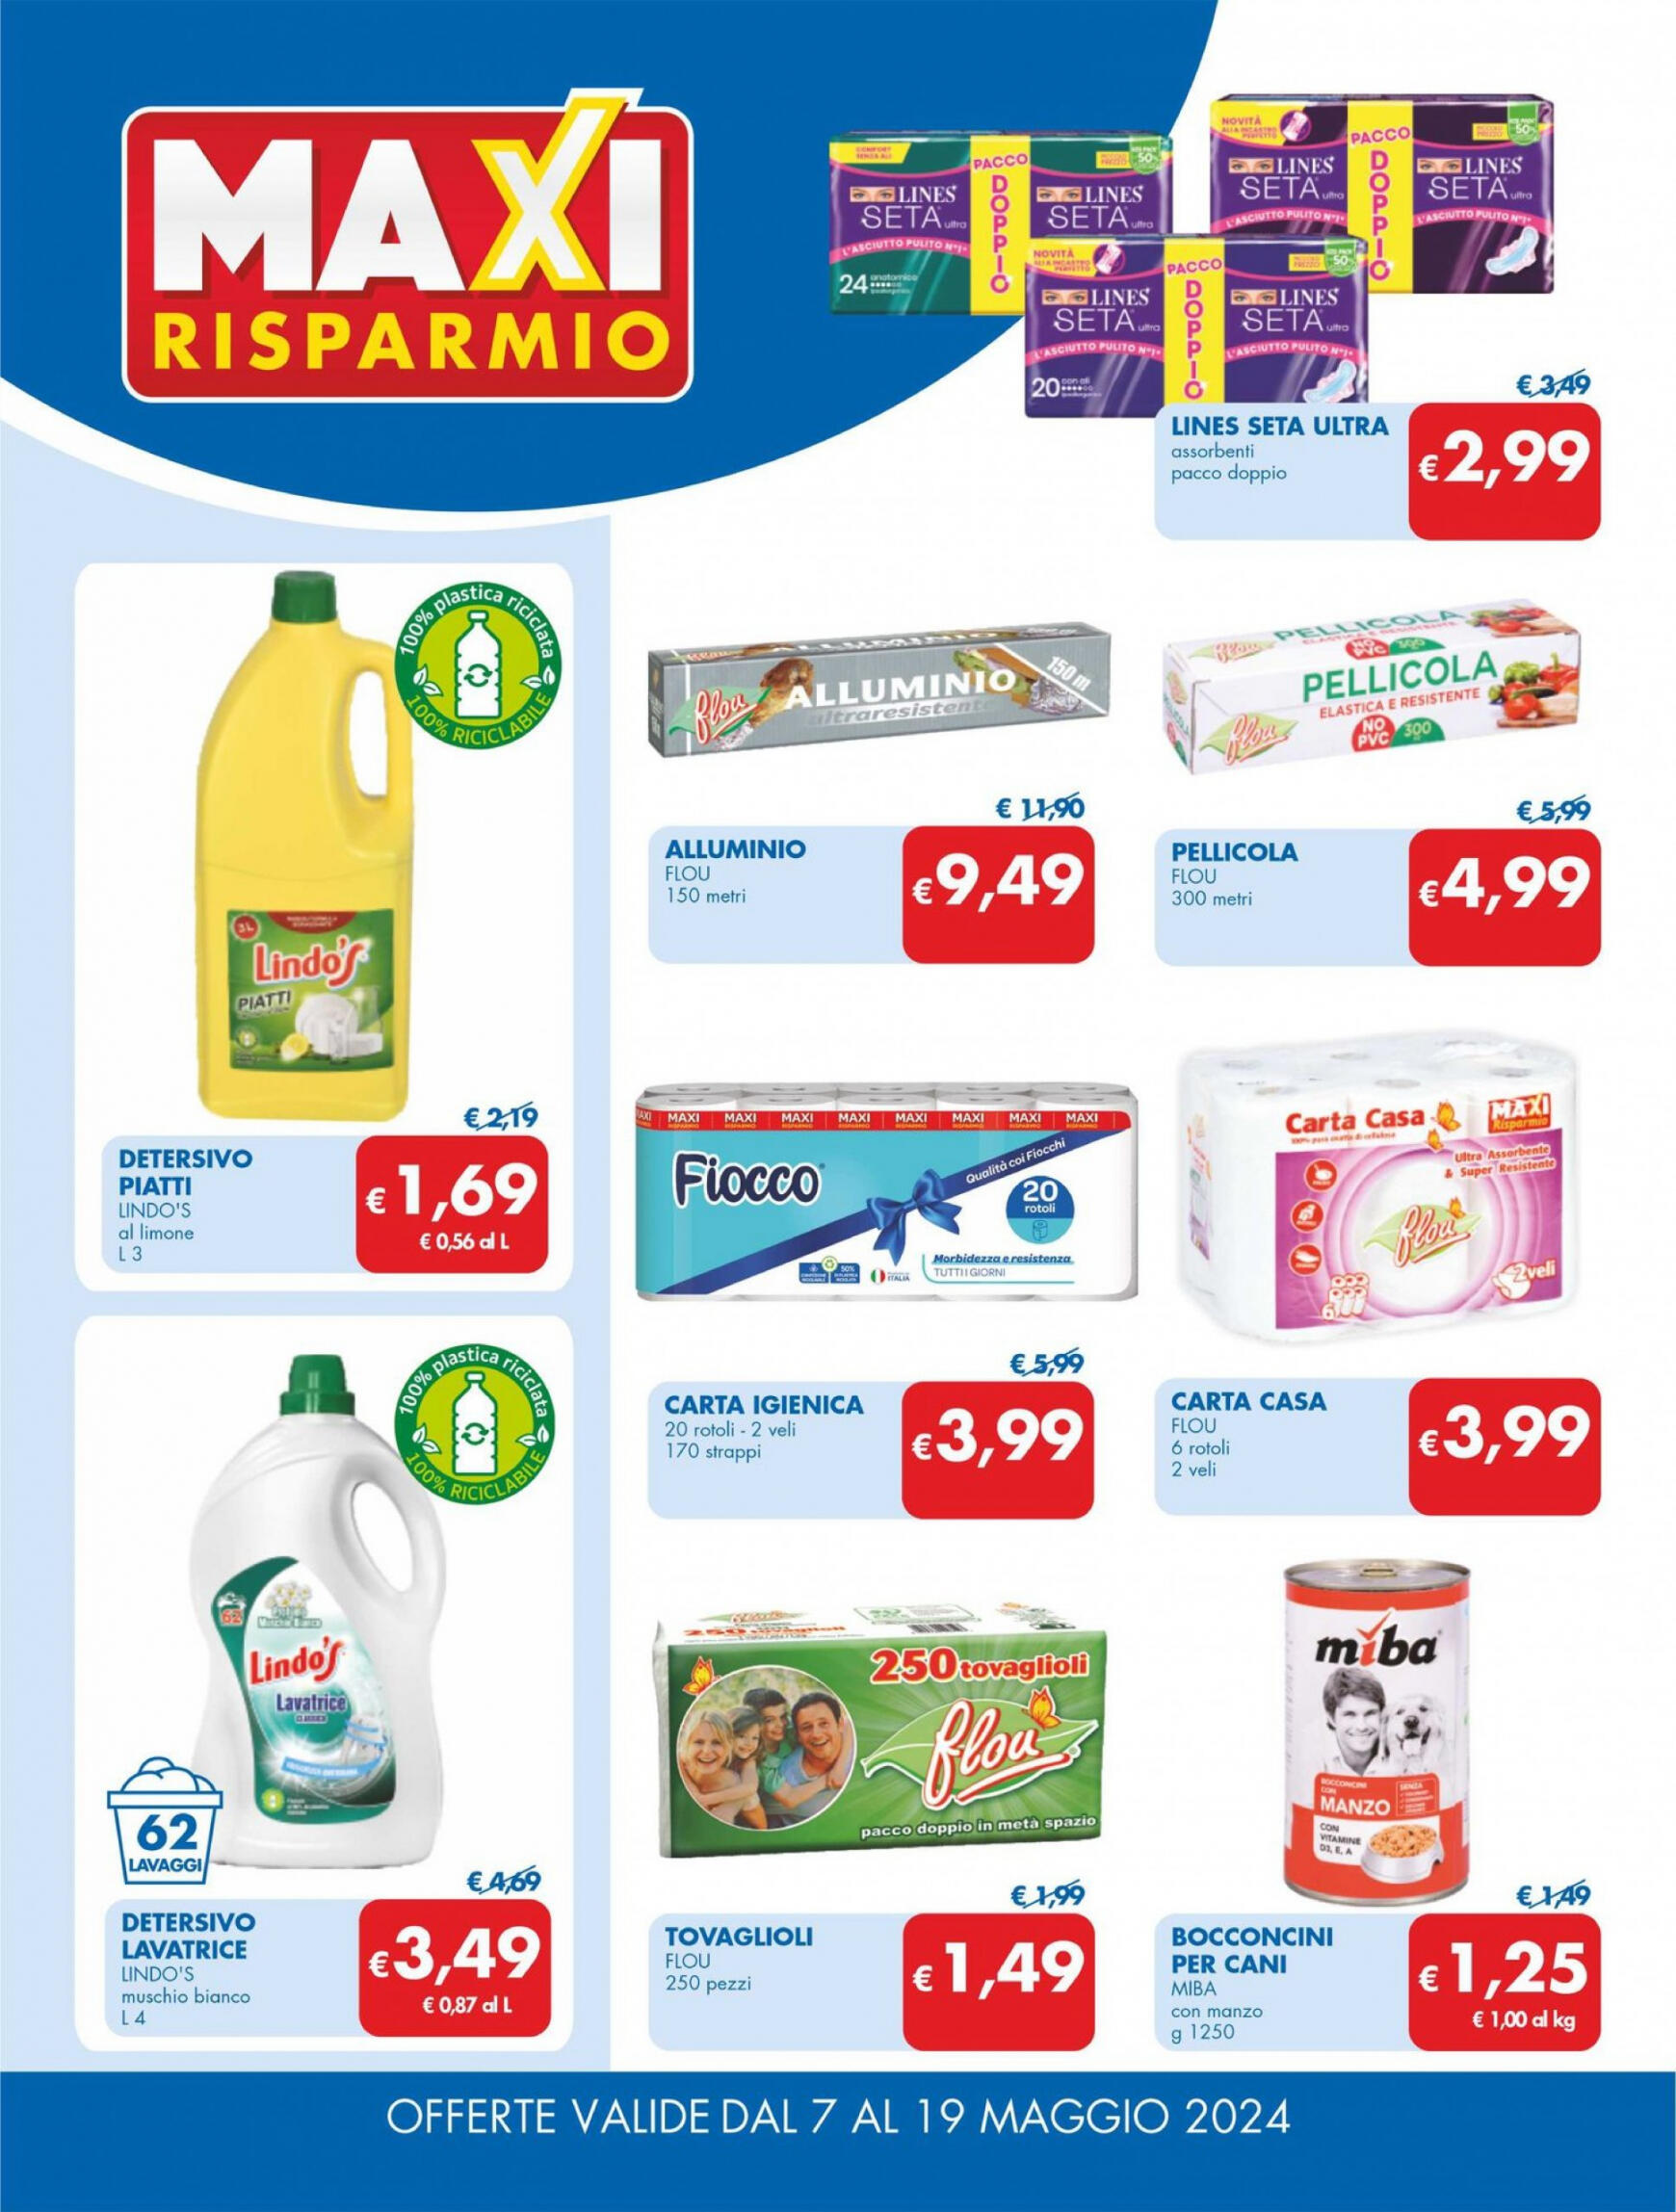 md-discount - Nuovo volantino MD - MD Discount 07.05. - 19.05. - page: 6